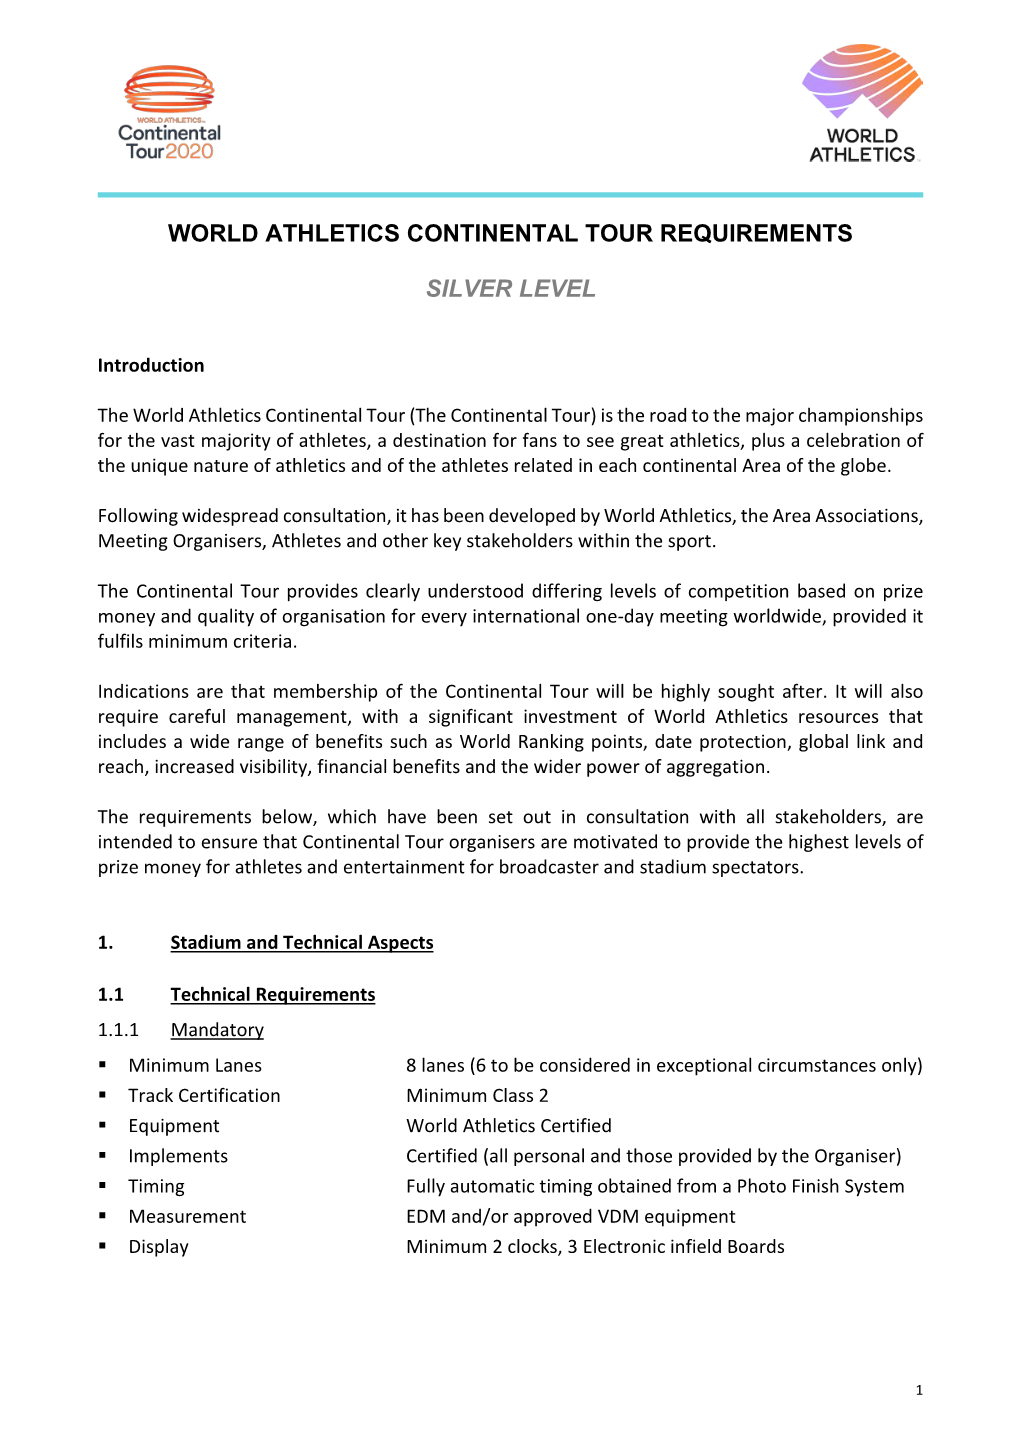 World Athletics Continental Tour Requirements Silver Level